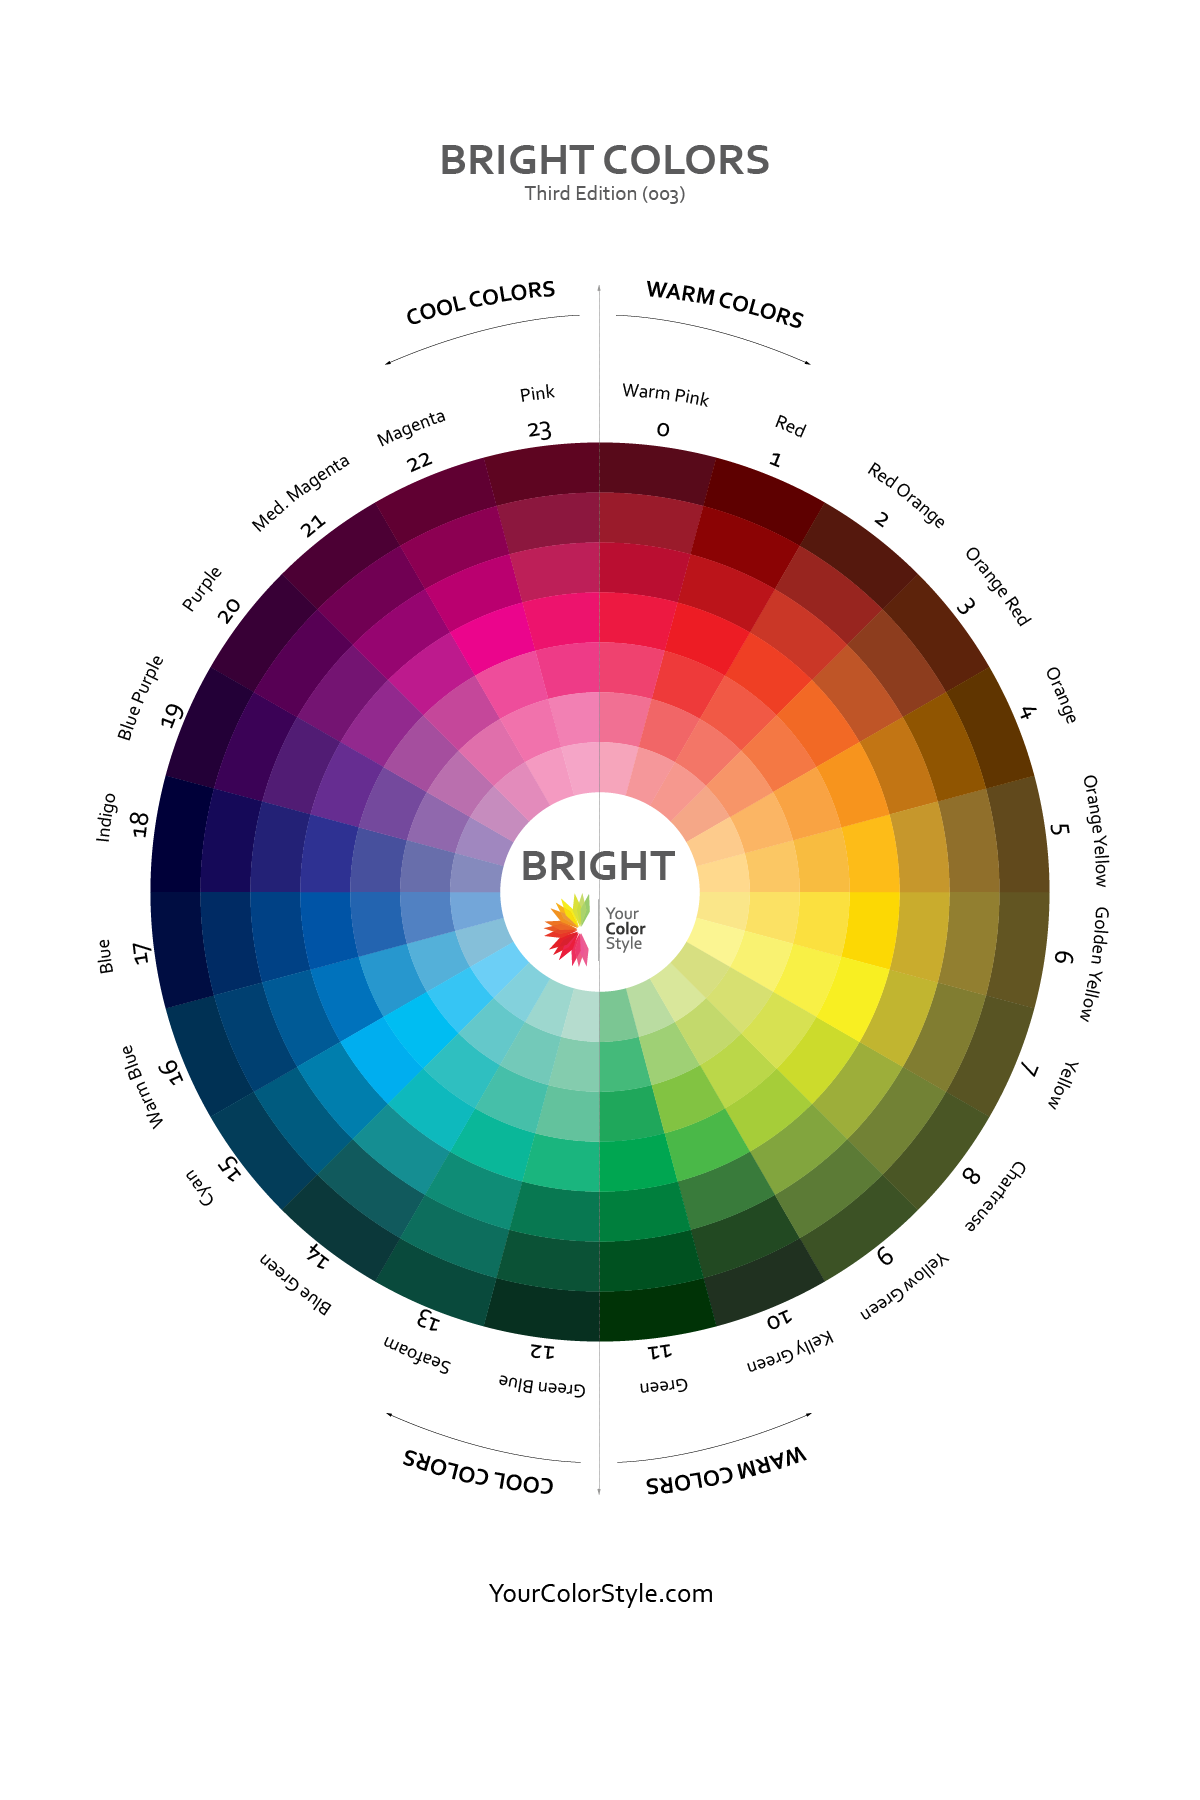 12 Colors on Wheel Explained